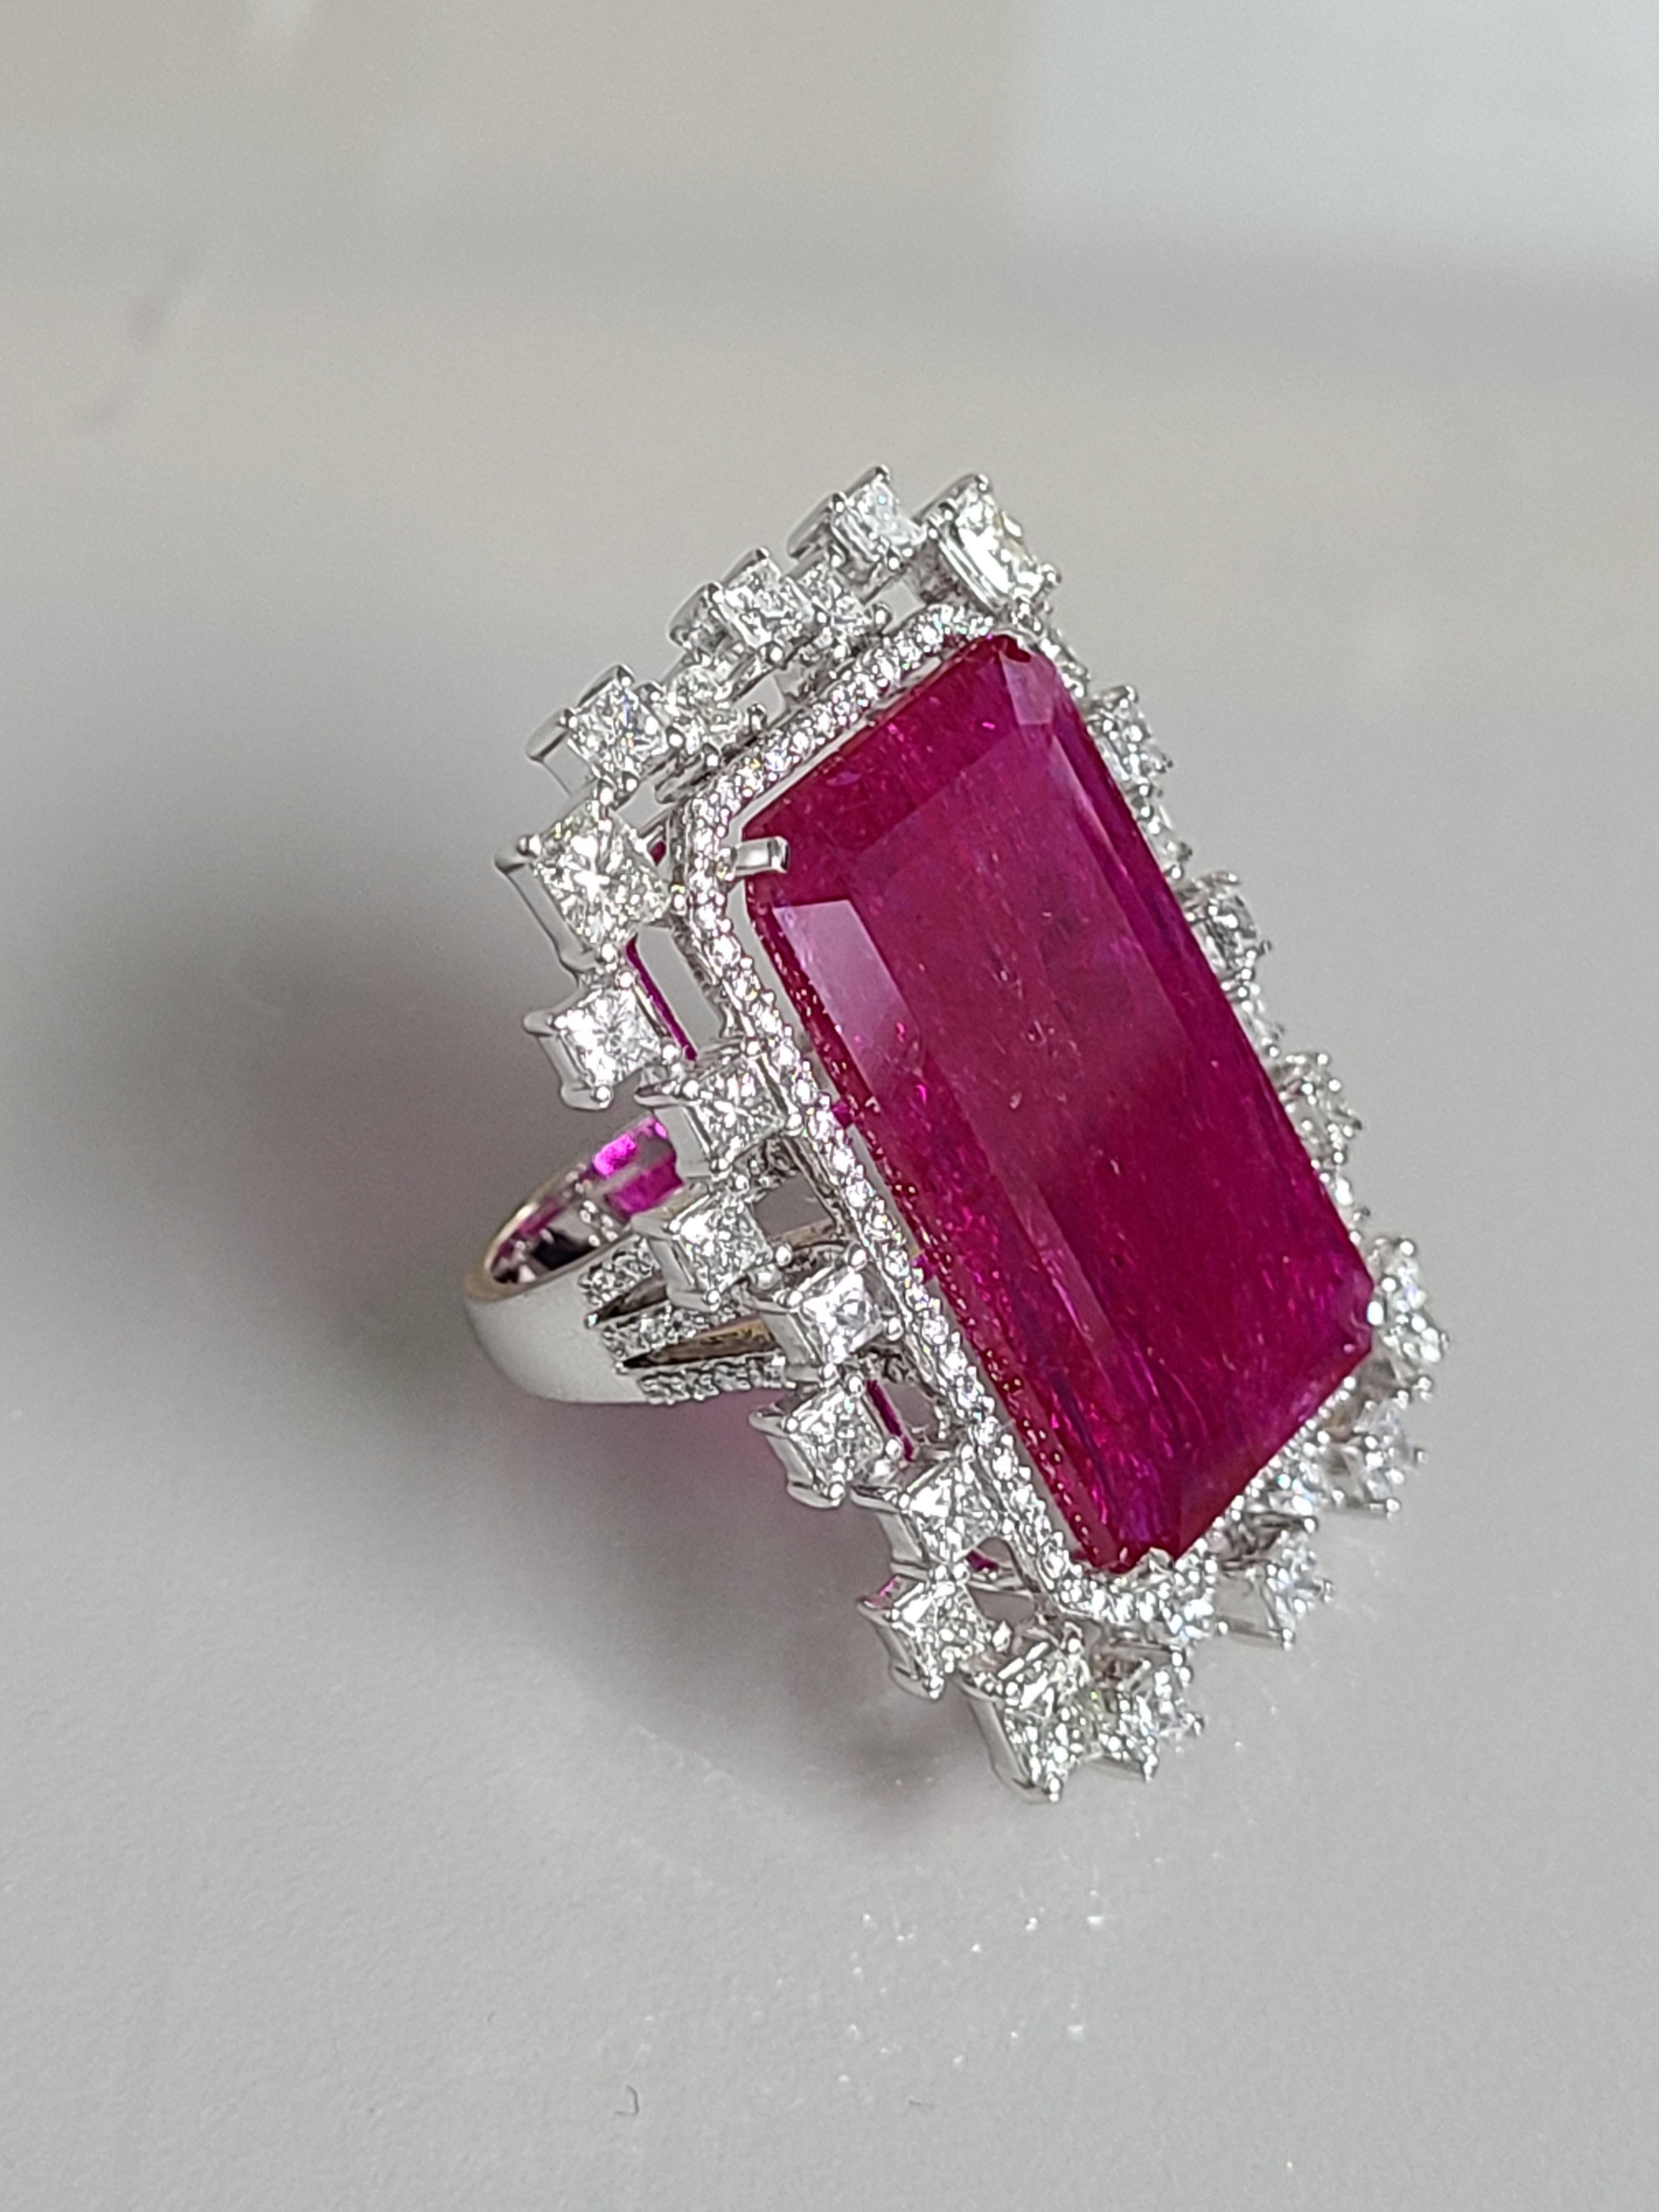 A beautiful and rare Big Mozambique un-heat ruby set in 18k white gold with diamonds . The ruby weight is 22.57 carats and is rare to find this size pieces . The diamond weight is 3.30 carats . The ring dimensions in cm 3.5 x 2.5 x 2.5 (L X W X H).